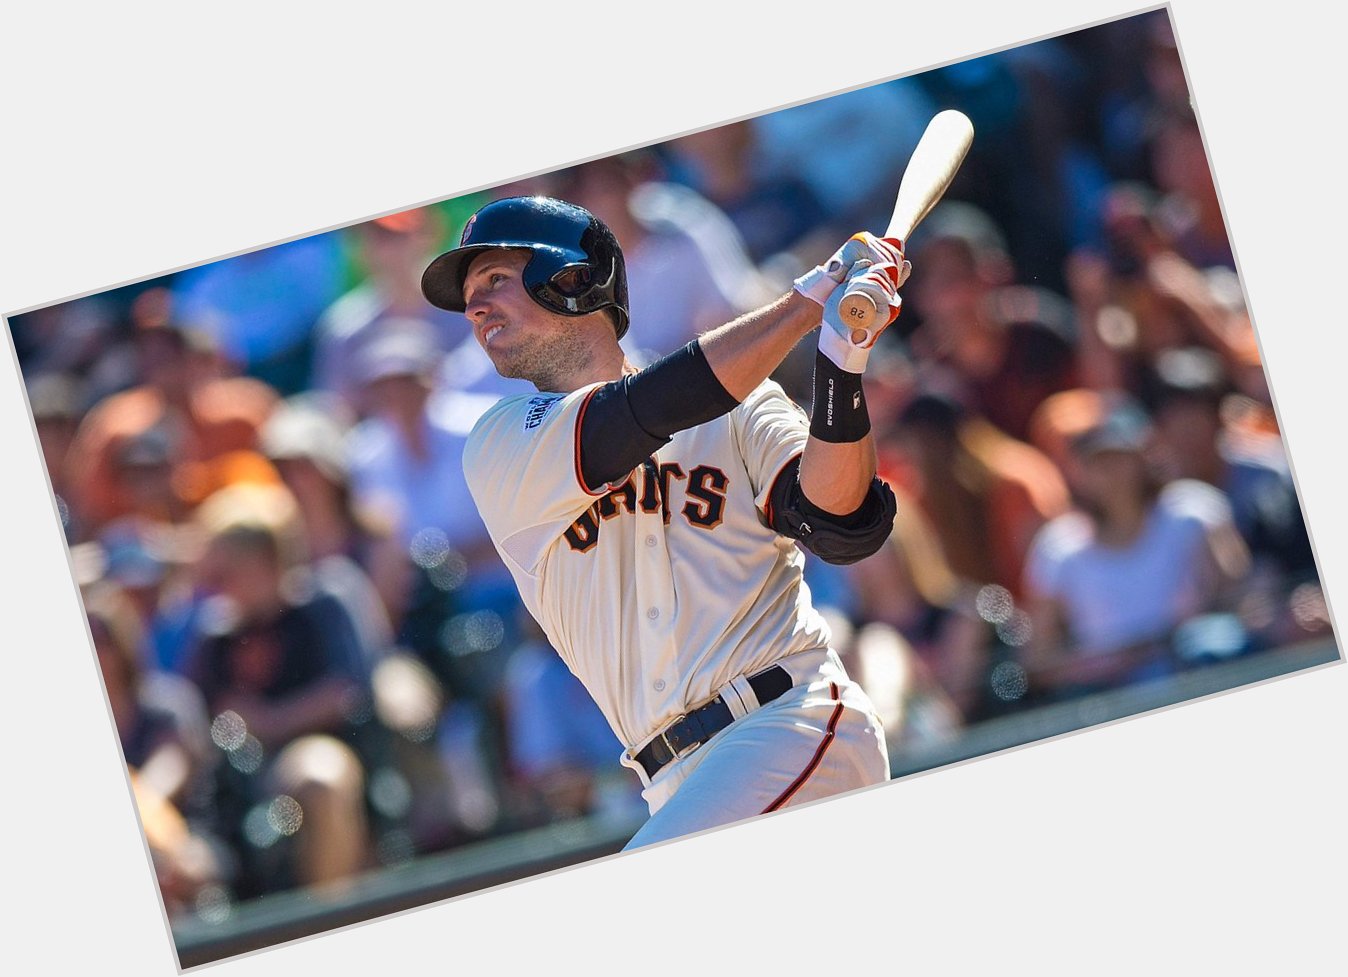 What do you get for the man who has it all? Happy 30th birthday to Buster Posey! 